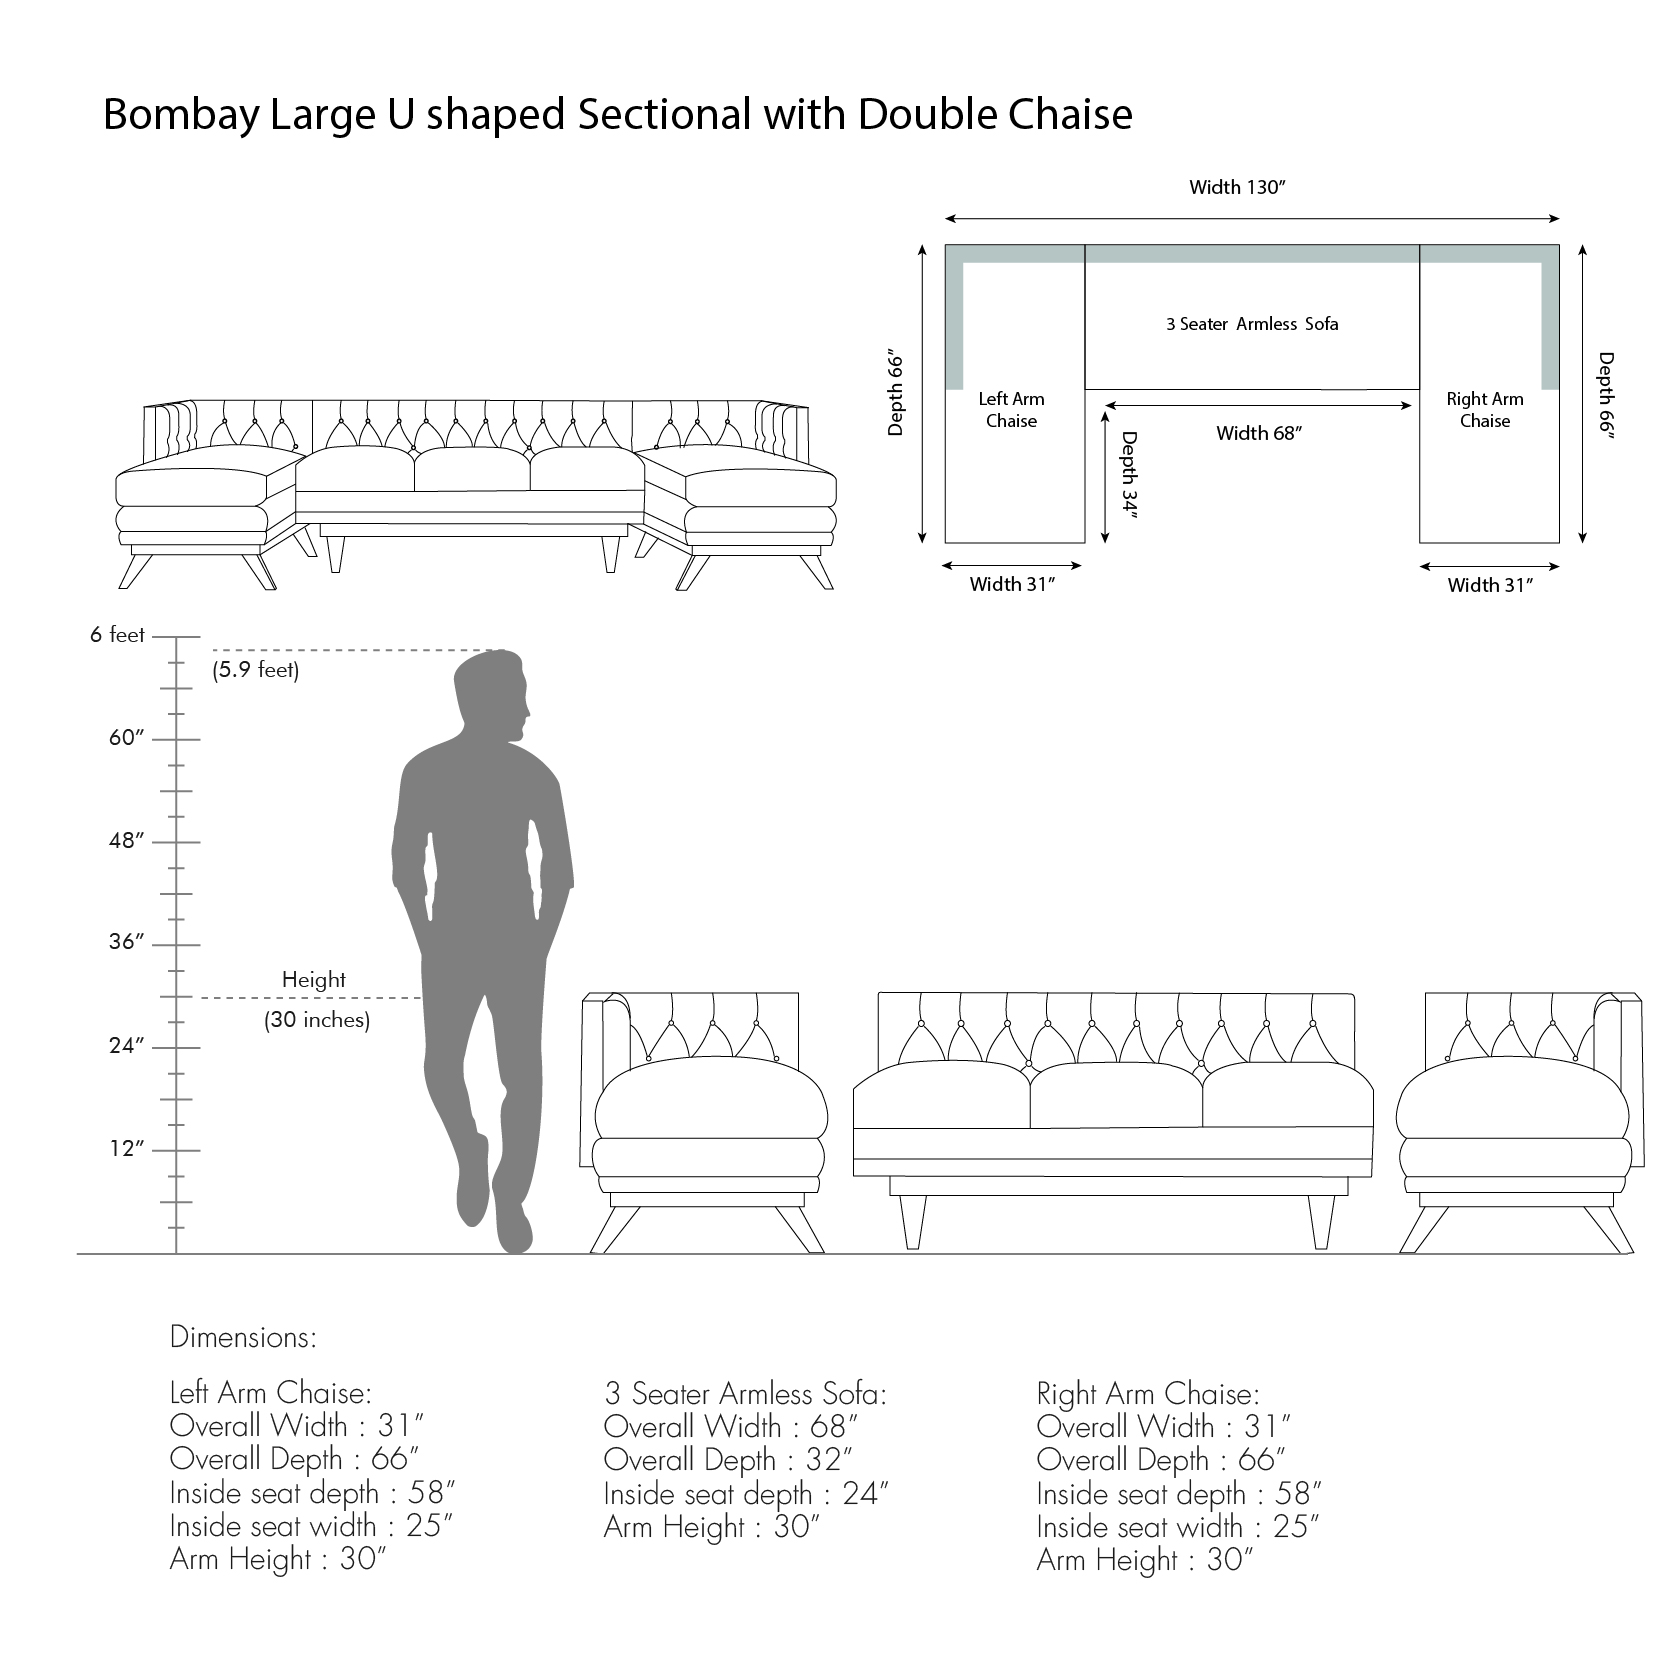 Bombay Large U-shaped Sectional with Double Chaise